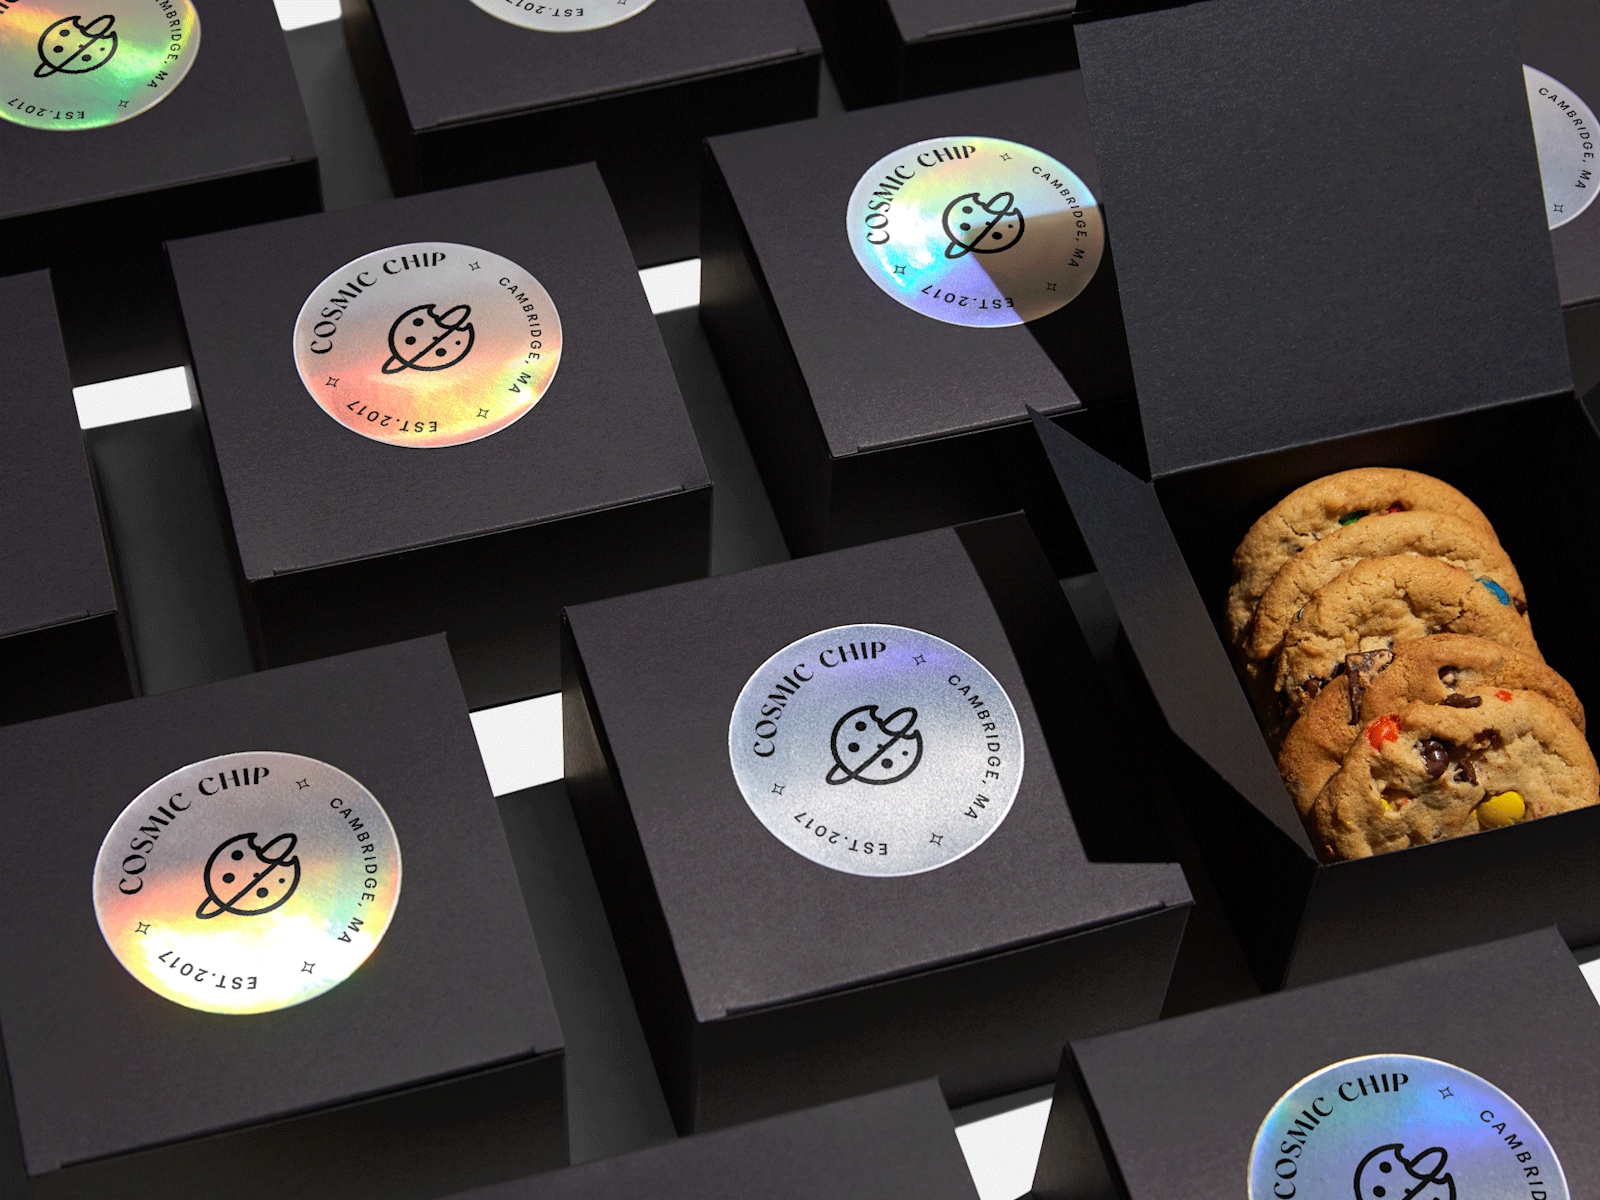 Black boxes neatly lined up in rows with circle holographic paper sticker labels applied to the top of each. One box is opened revealing cookies inside